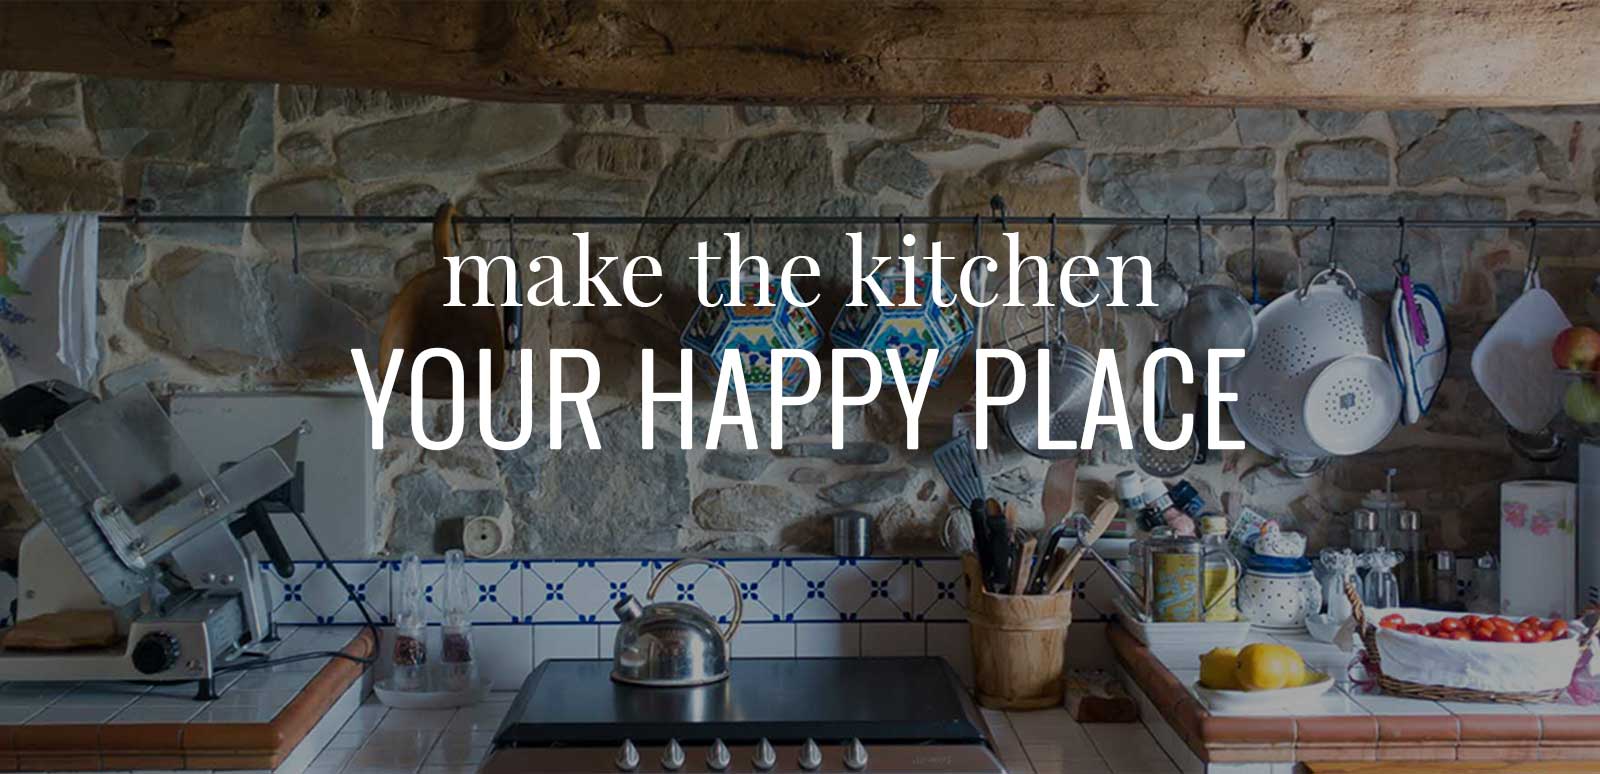 Welcome to Arousing Appetites, your home for adventurous cooking and happy kitchen living